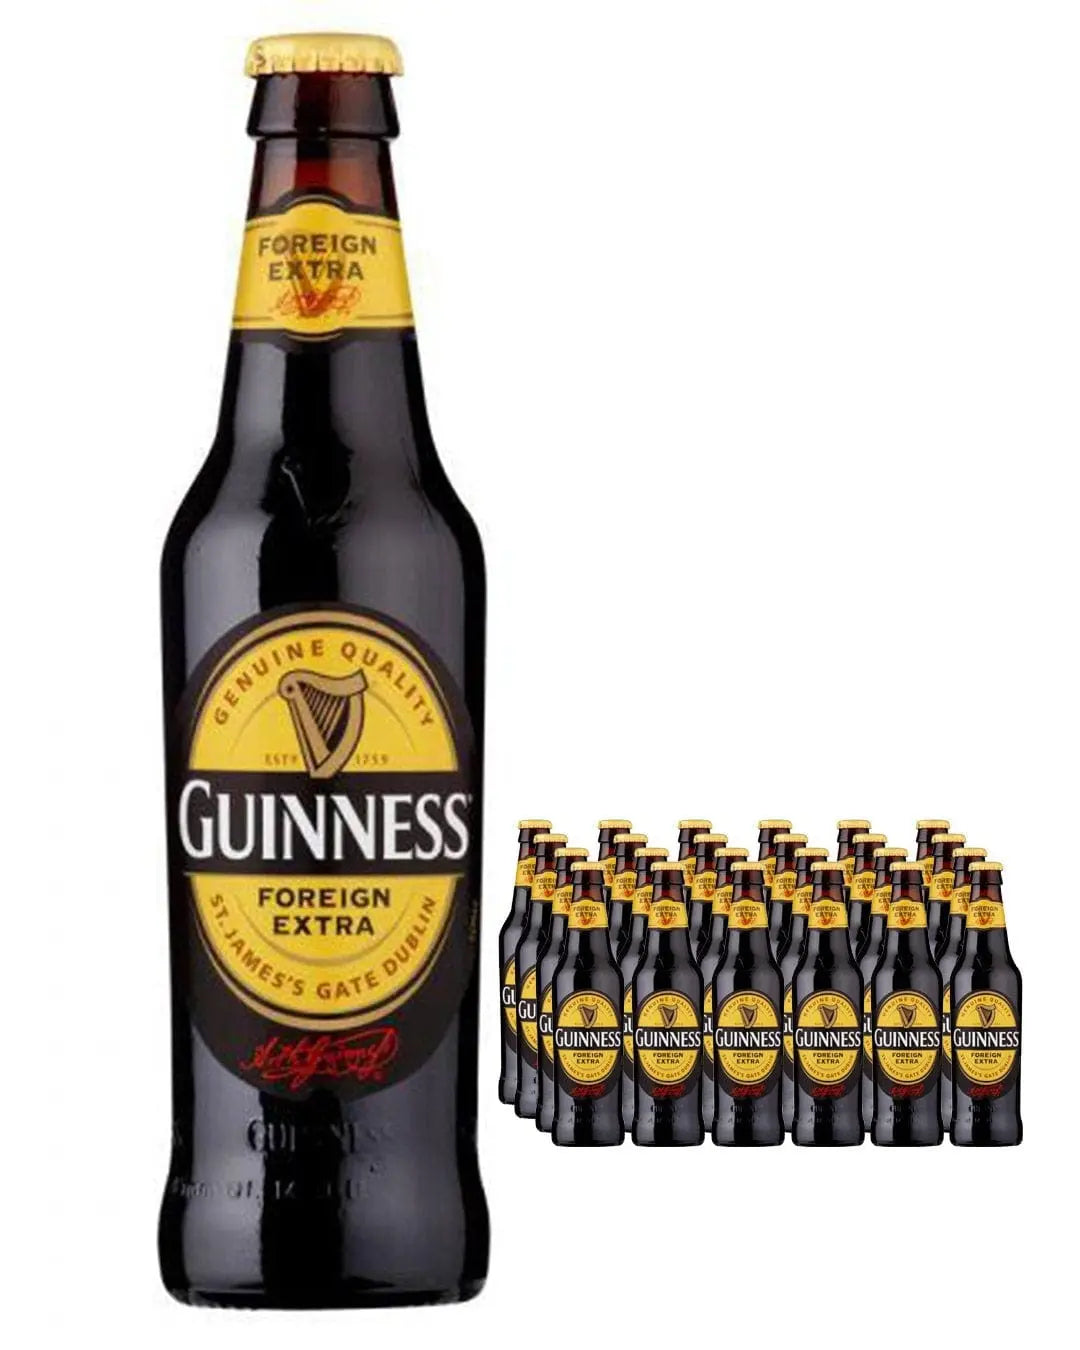 Guinness Nigerian Foreign Extra Stout Beer Bottle Multipack, 24 x 325 ml Beer